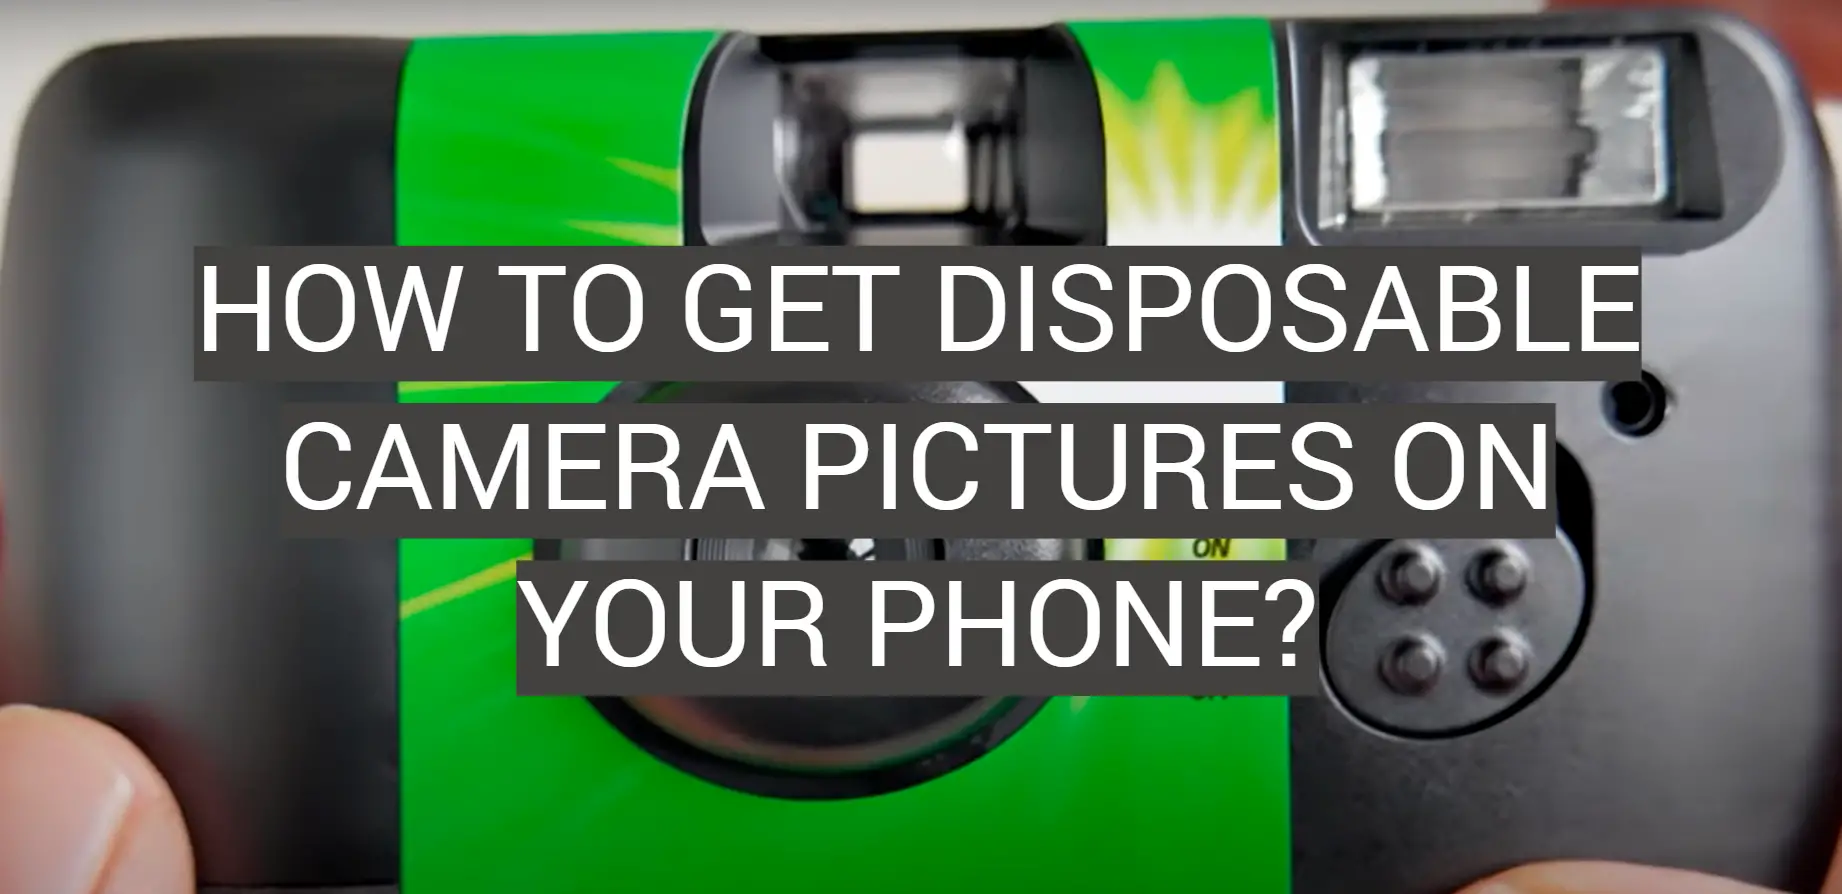 How to Get Disposable Camera Pictures On Your Phone?